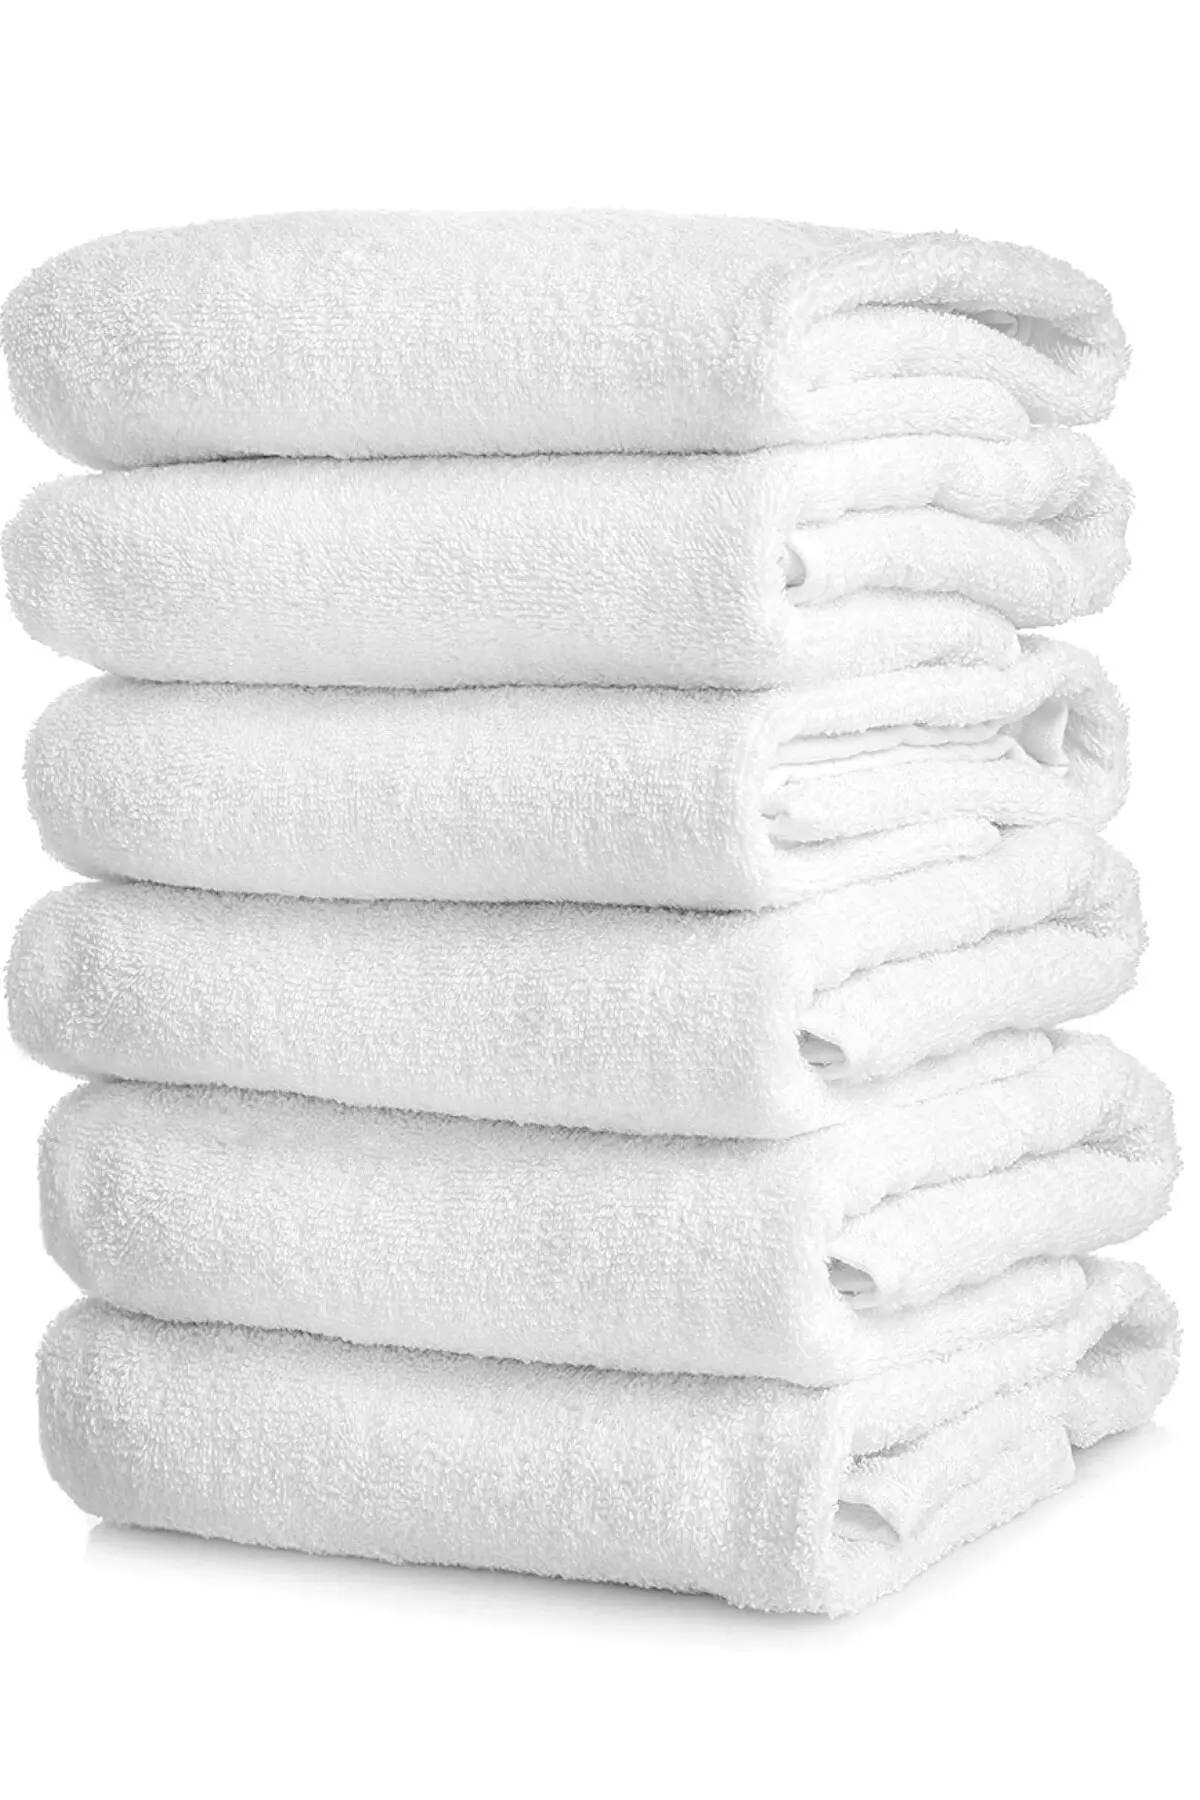 Hotel Group Bath Towel 6 Pieces Cotton 70x140 Cm White Soft White Set of 6 - Hair Towels, Drying Towels